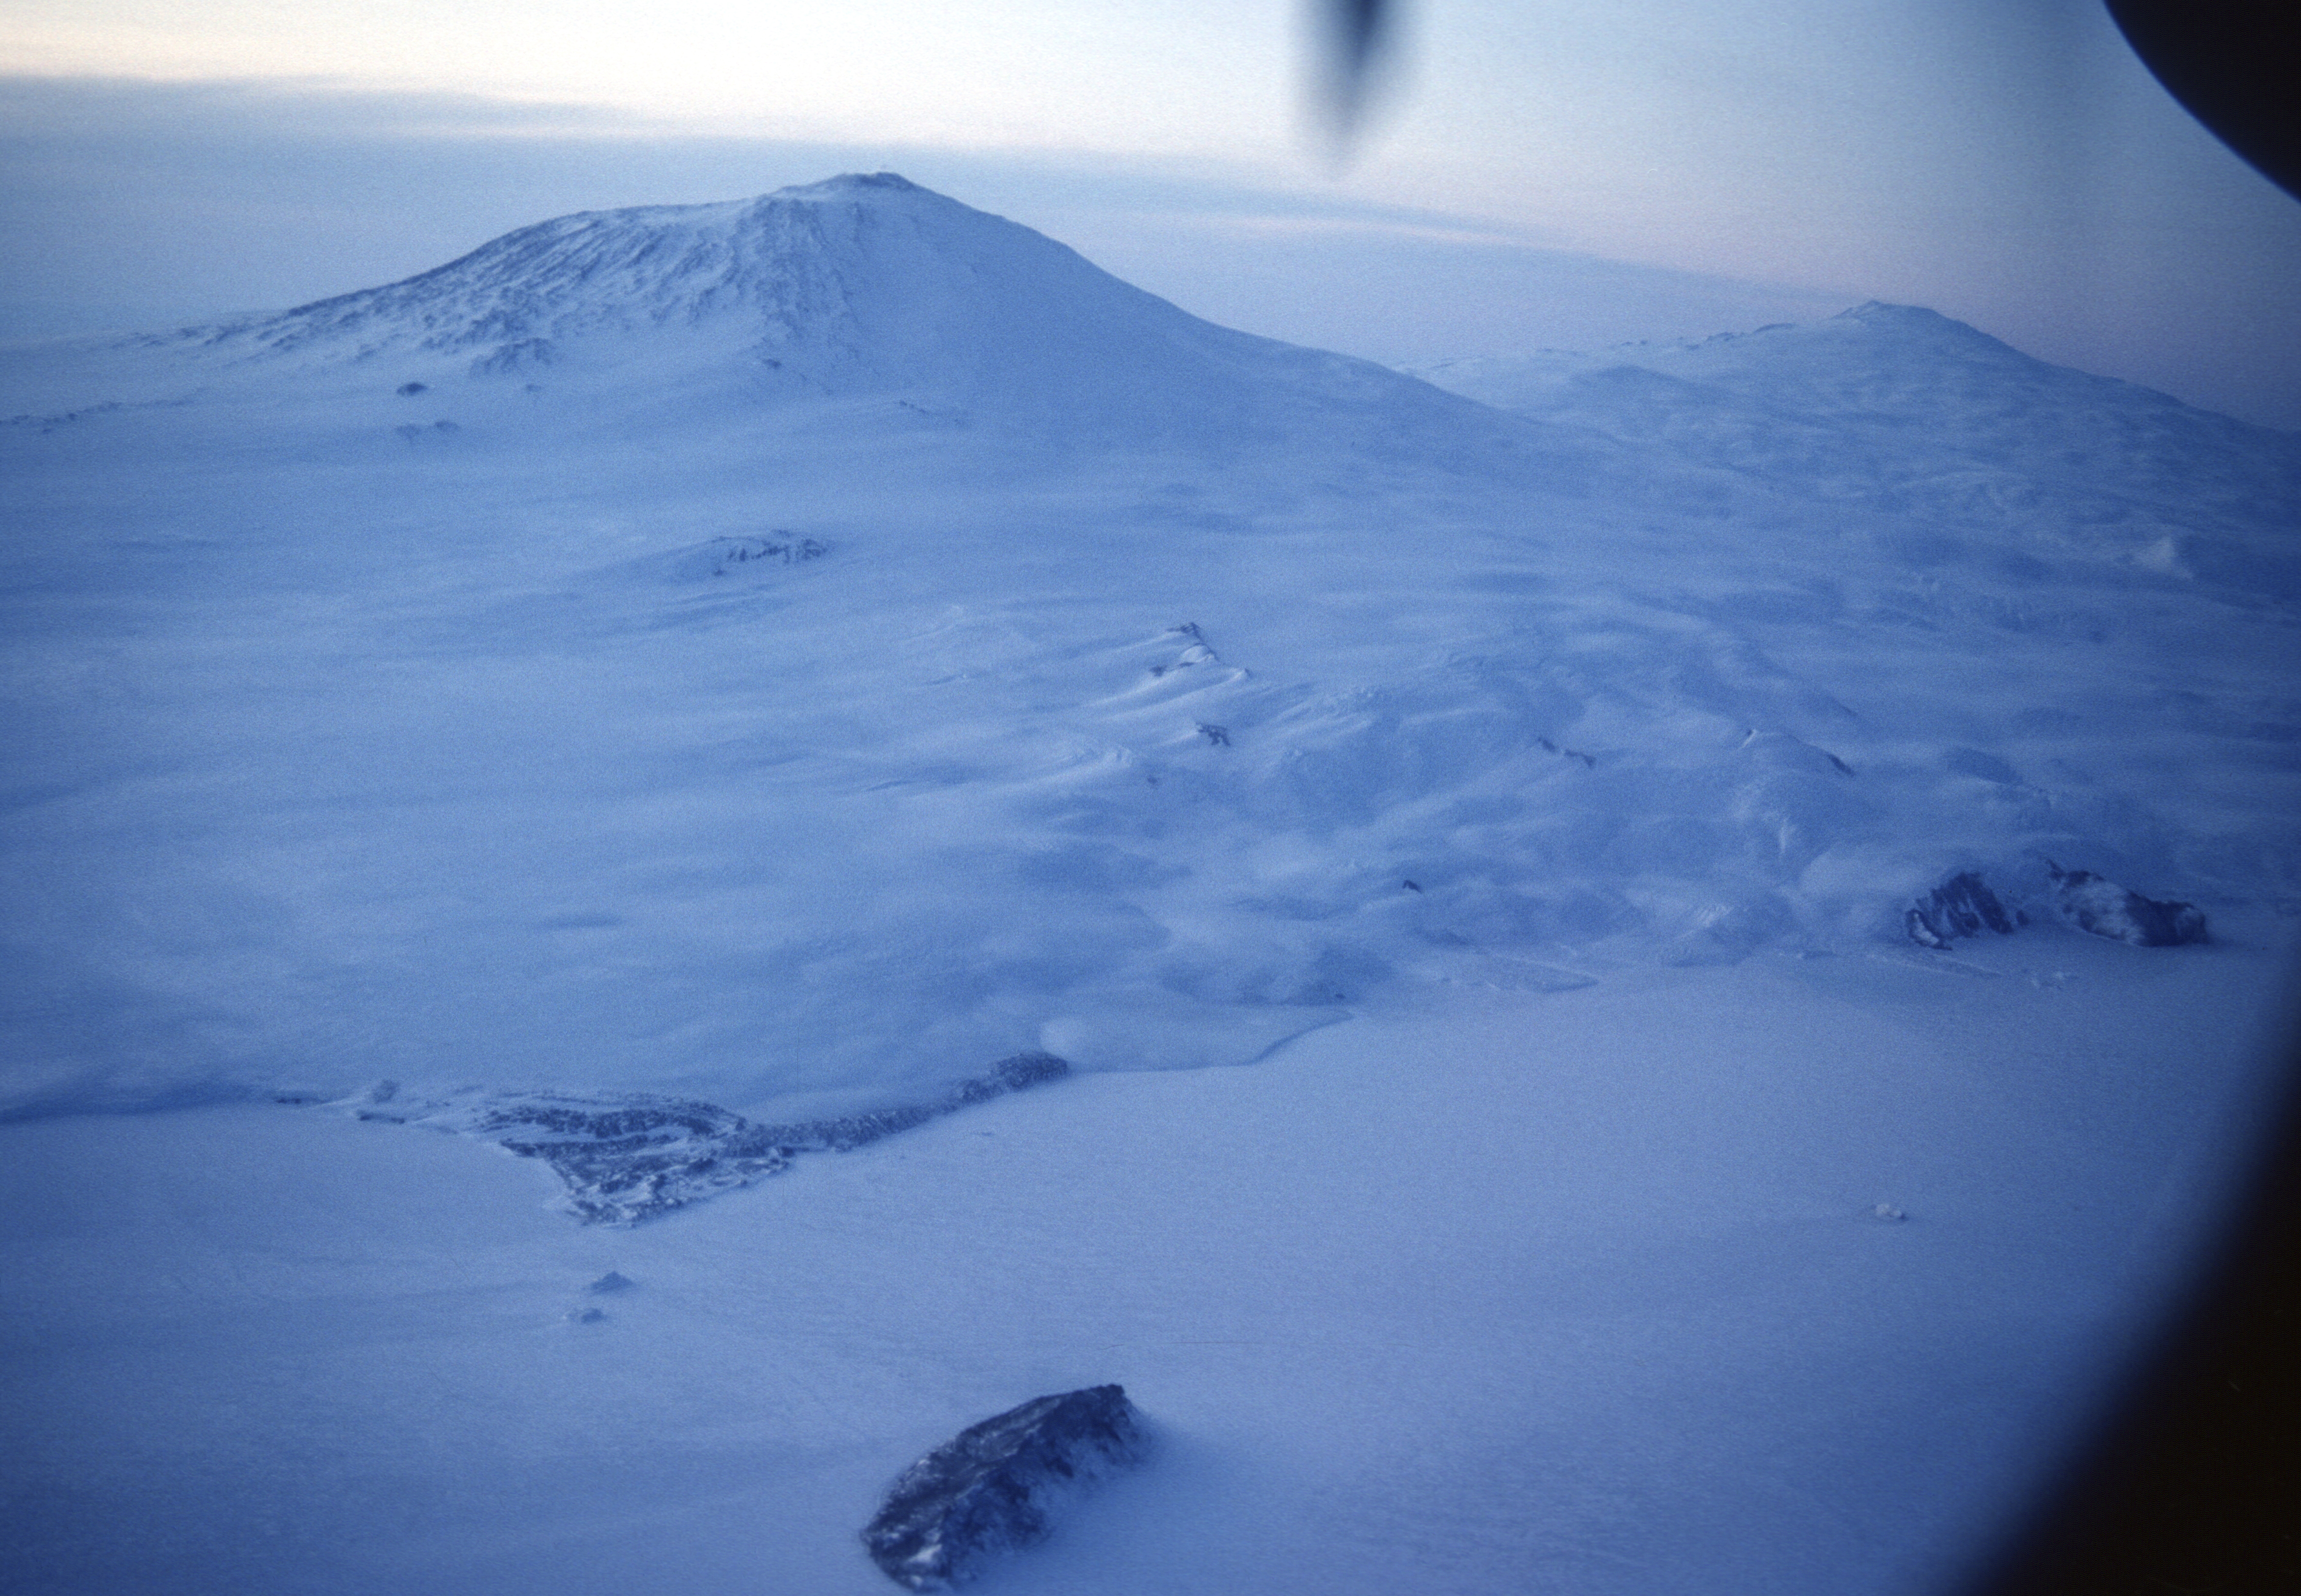 Aerial view of a snow-covered mountain.